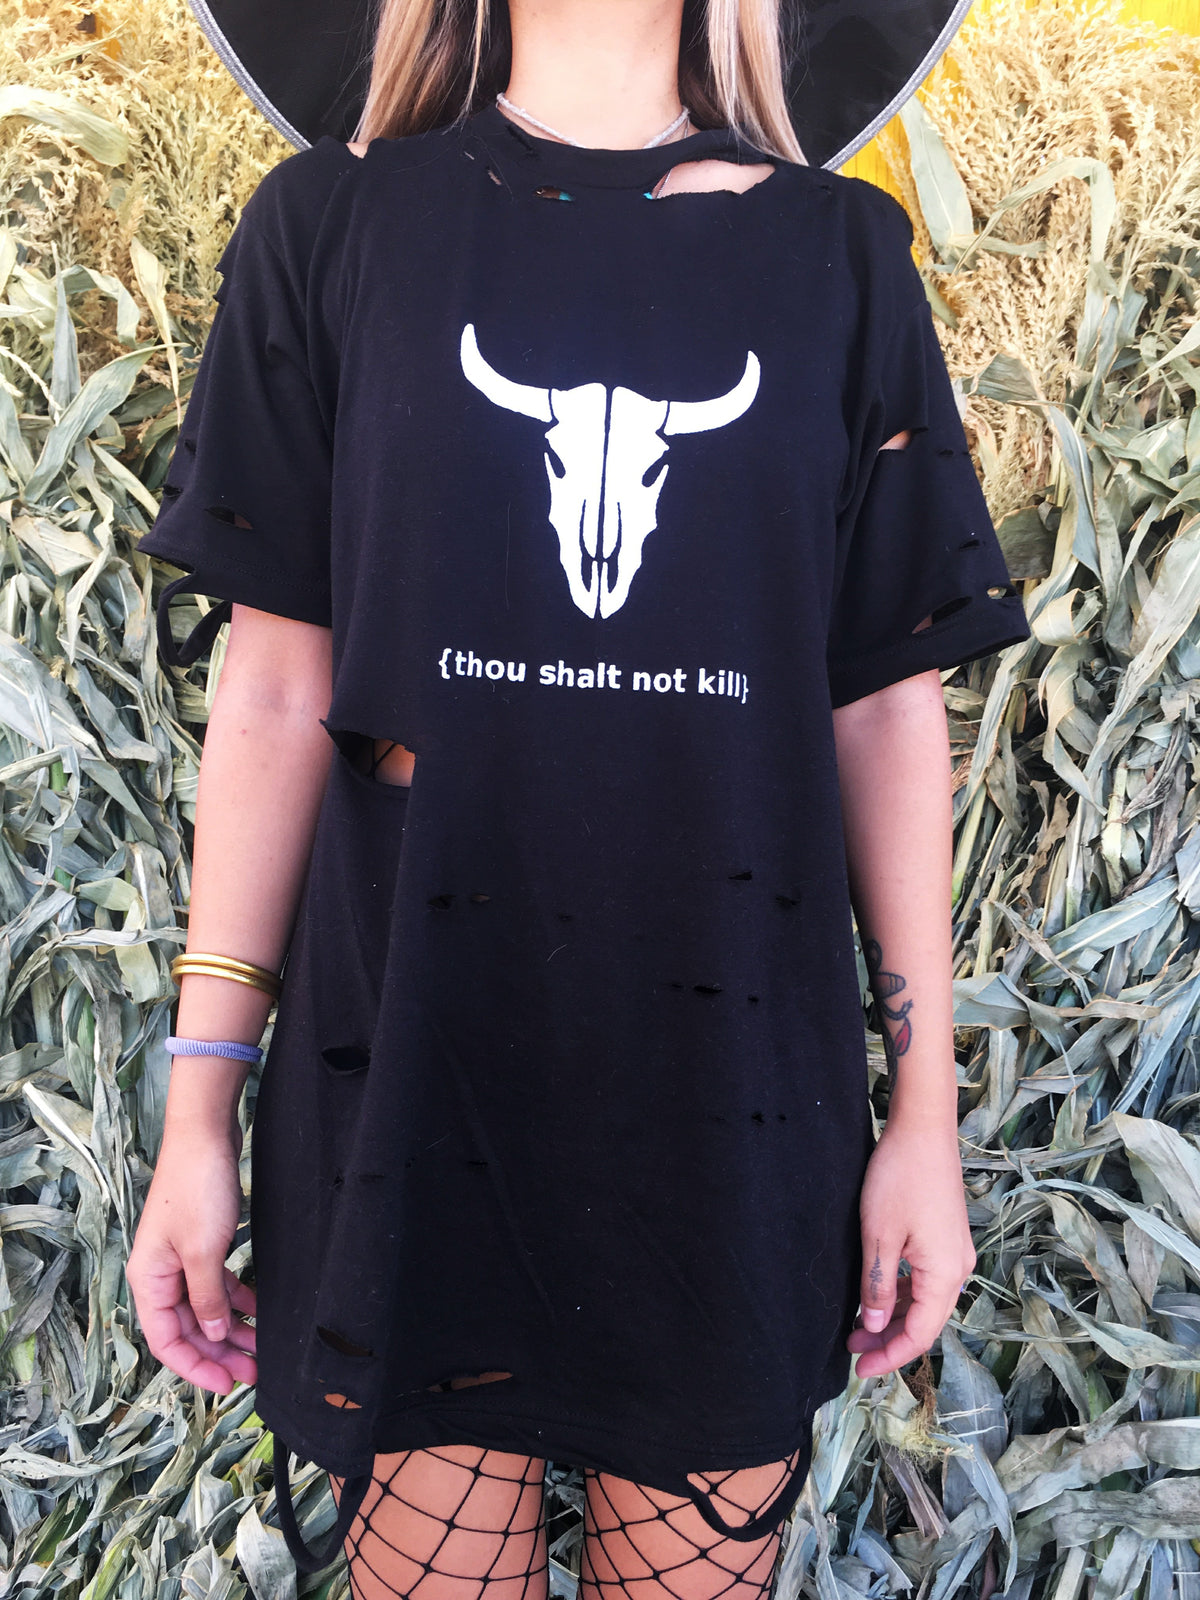 "Though Shalt Not Kill" with Cow Skull T-shirt